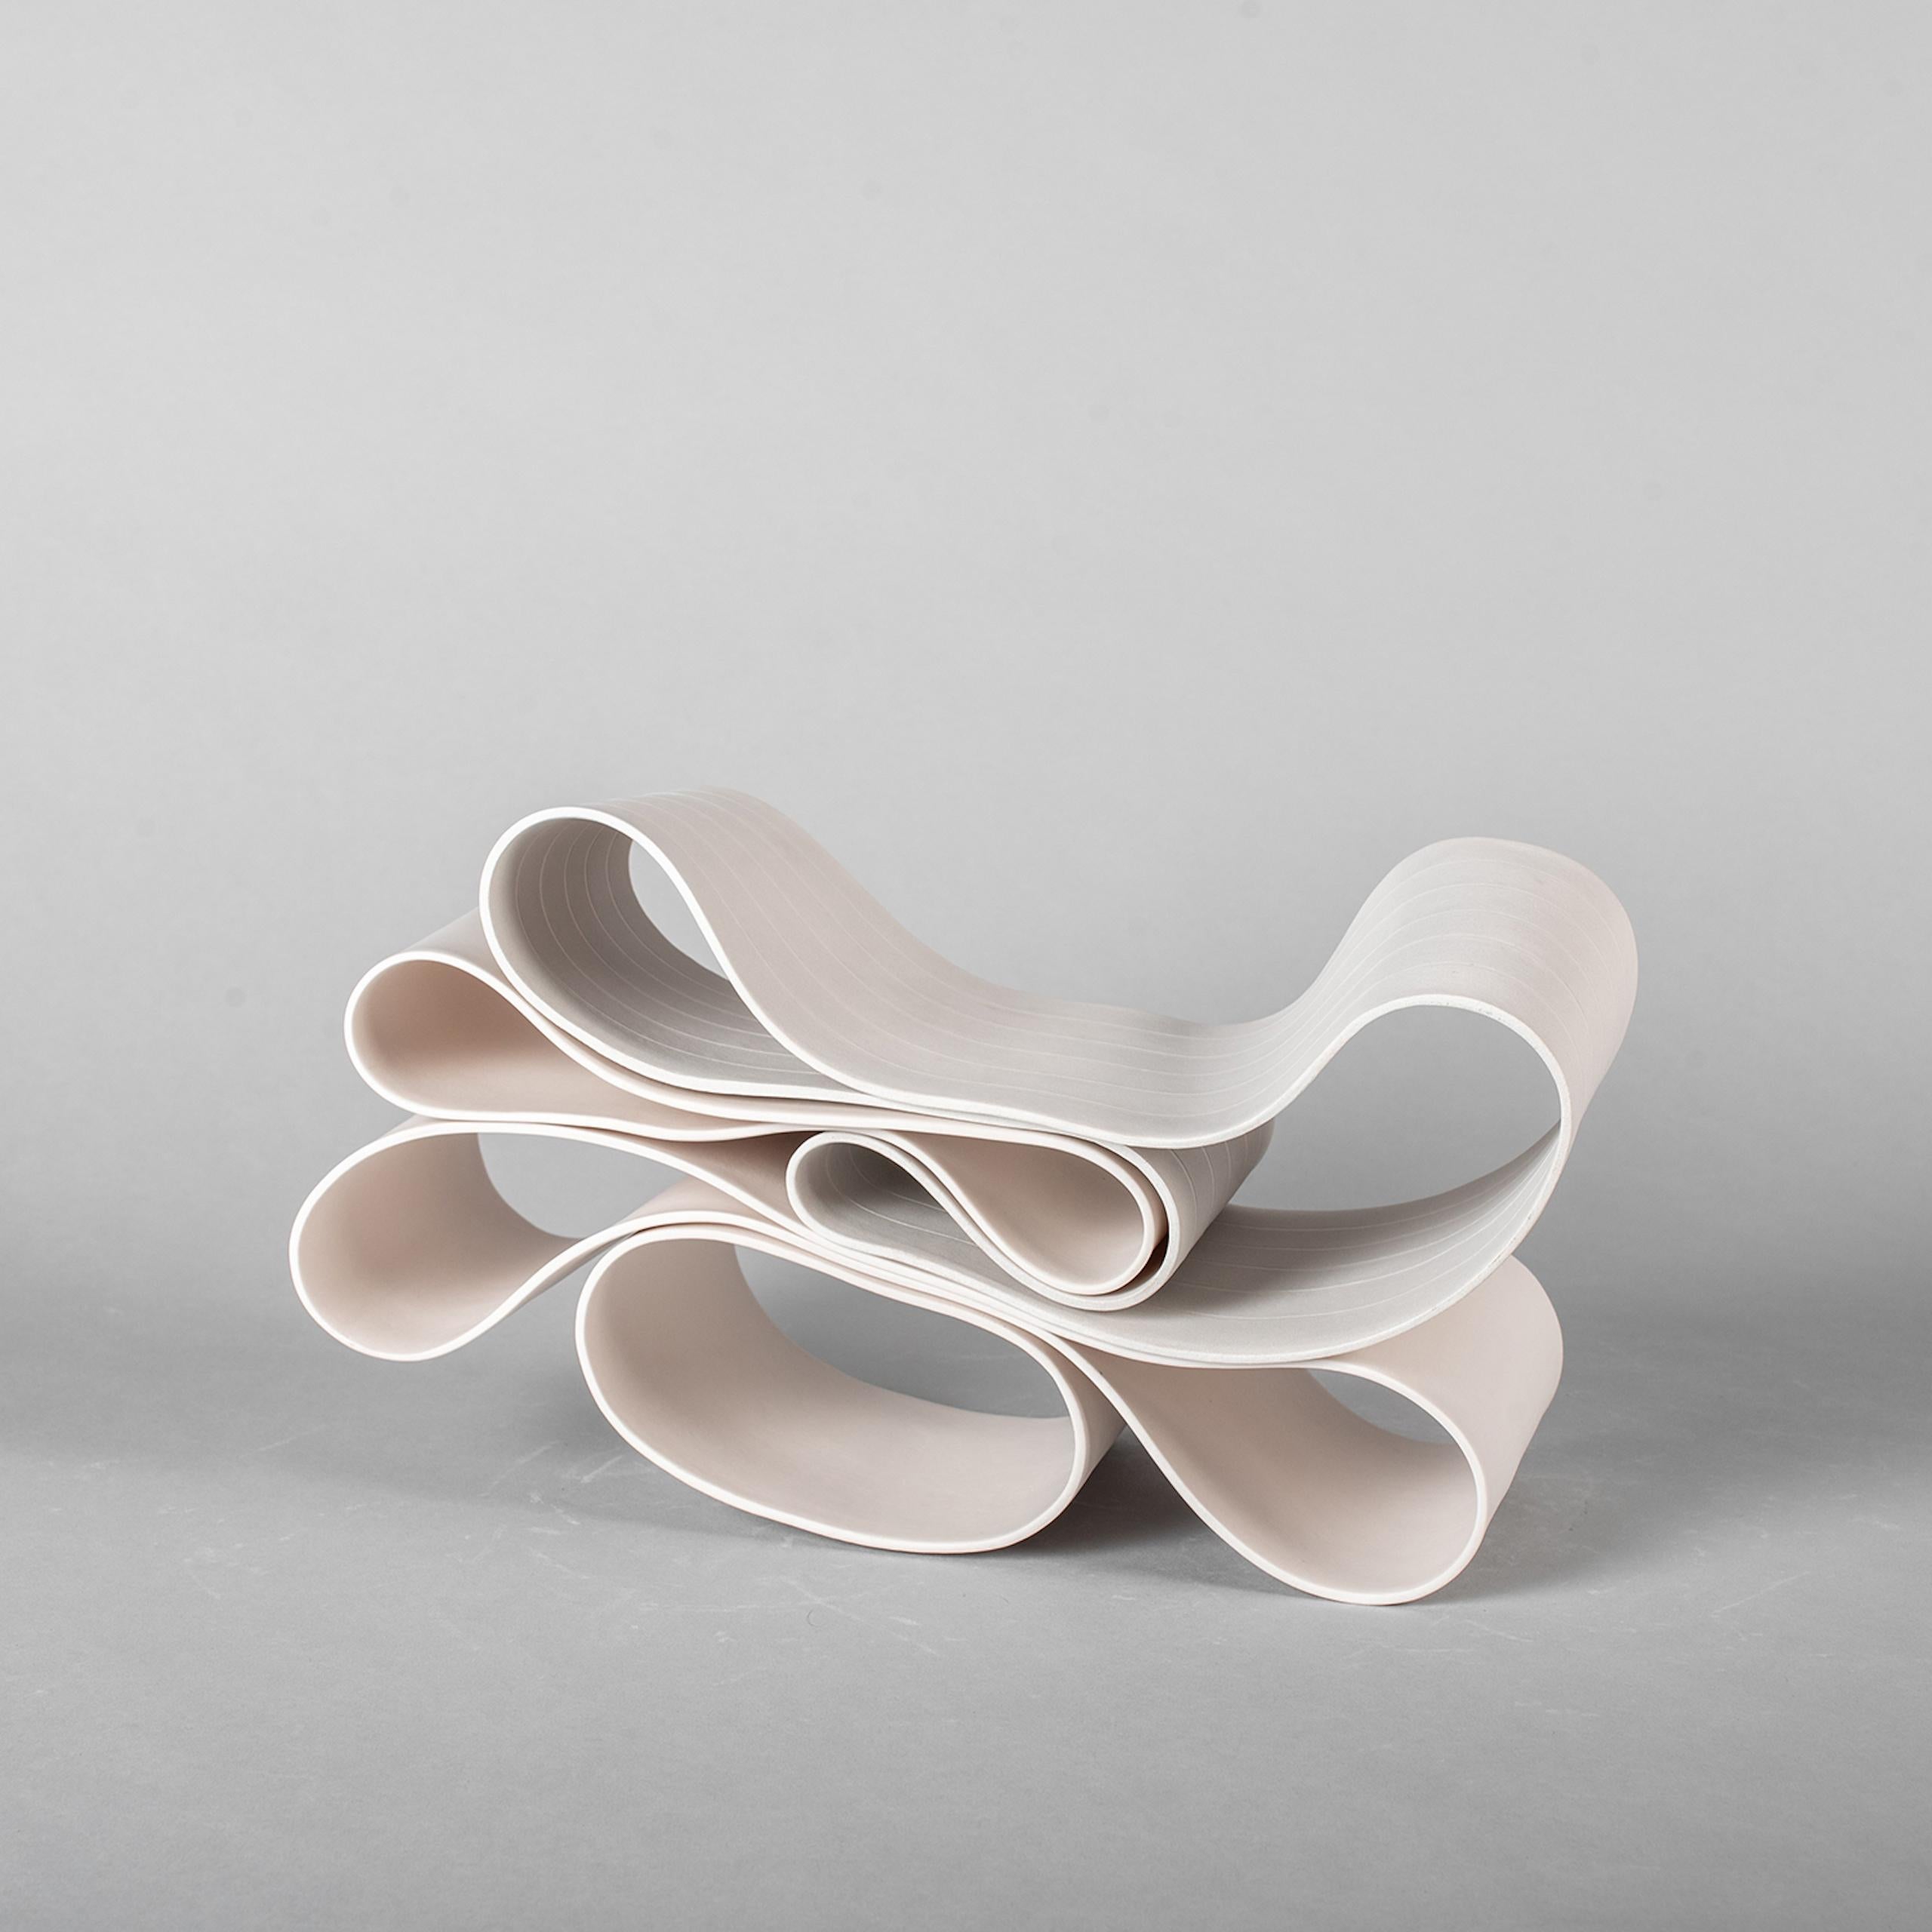 Folding in Motion 10 by Simcha Even-Chen - Porcelain sculpture, white, line For Sale 2